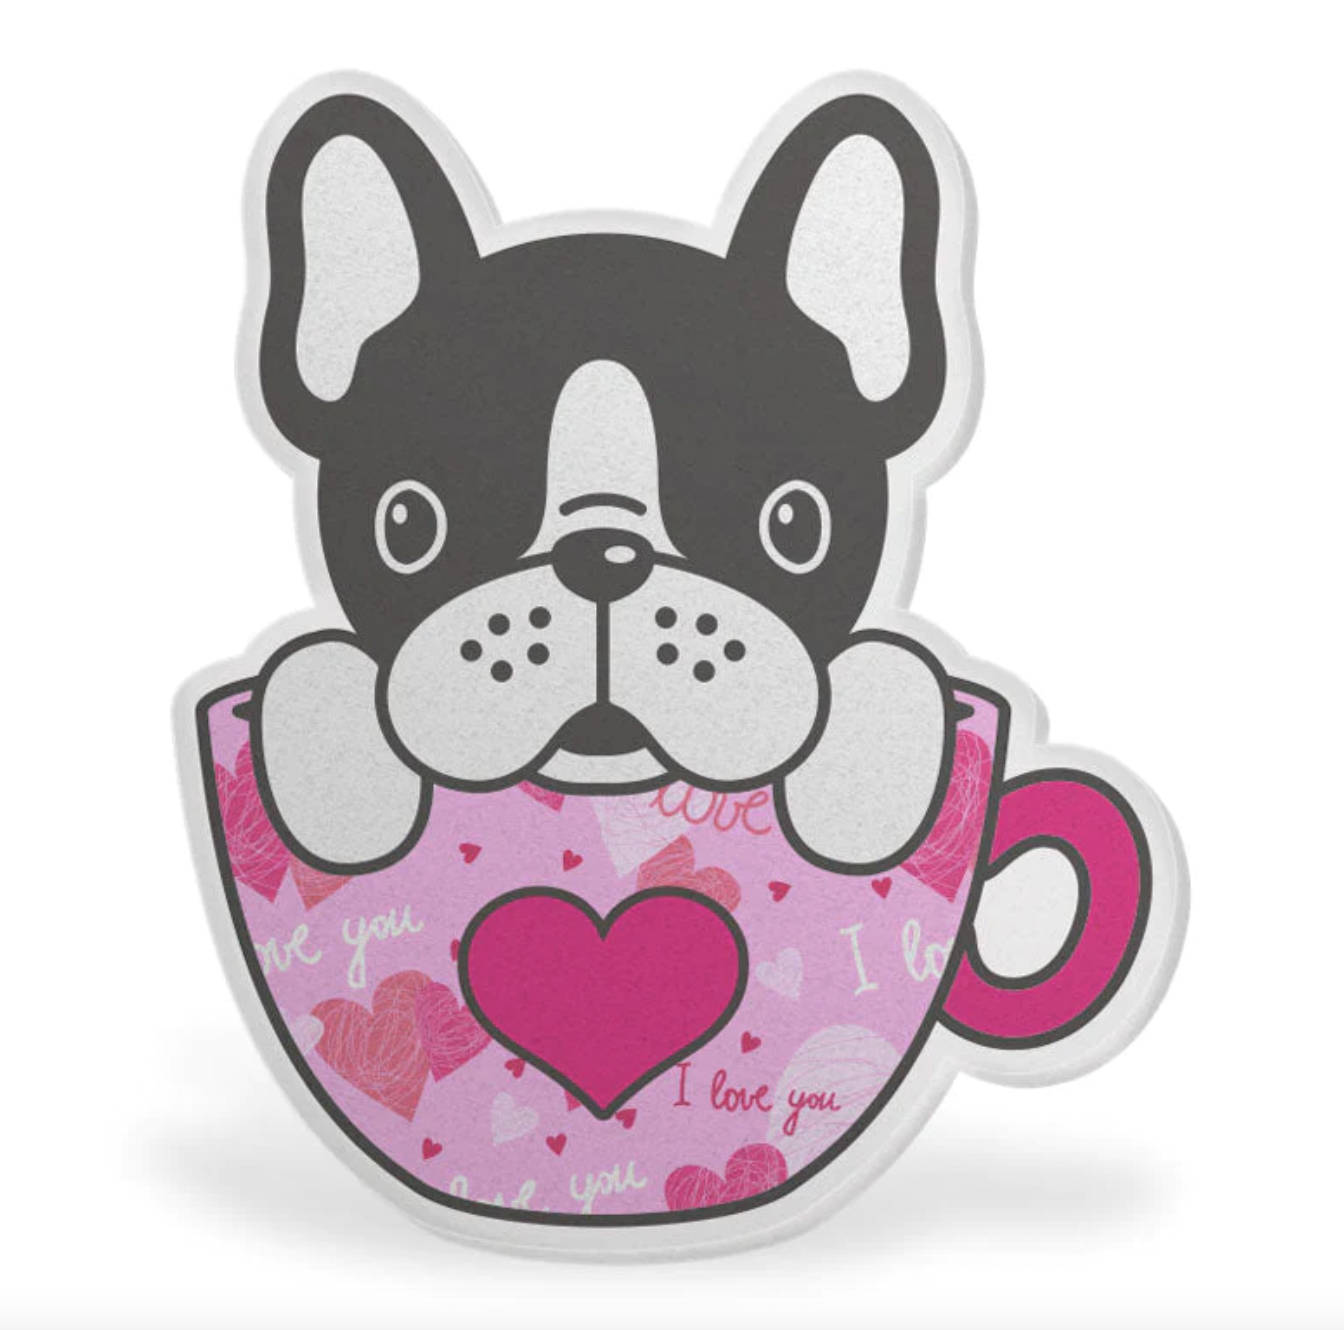 INTERCHANGEABLE BUTTON PUP IN COFFE MUG